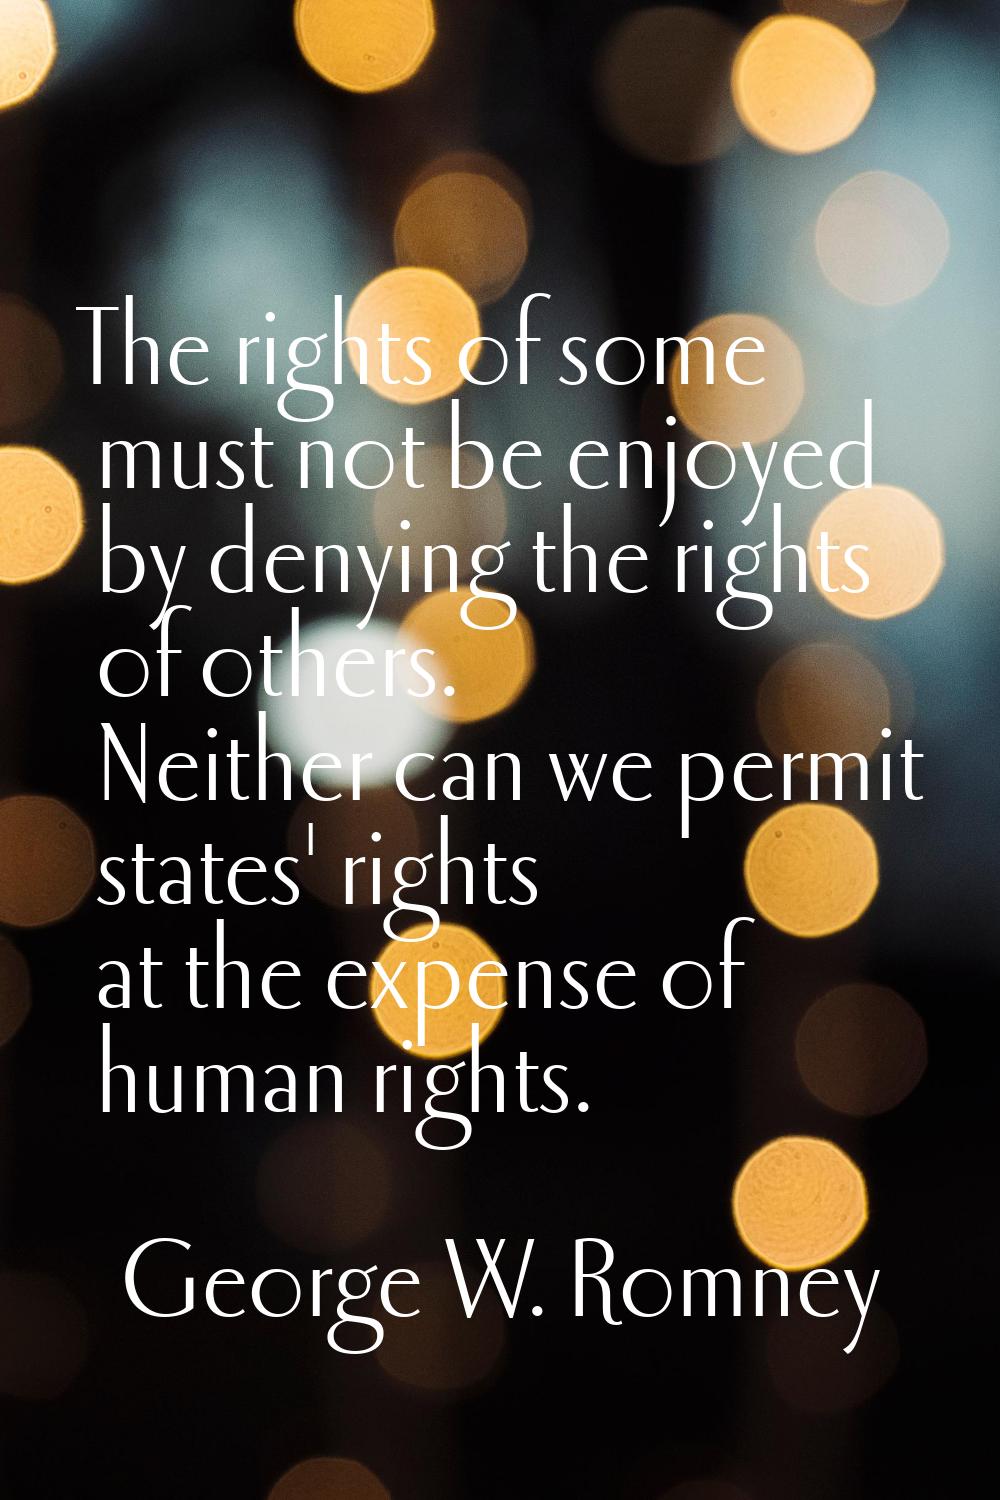 The rights of some must not be enjoyed by denying the rights of others. Neither can we permit state